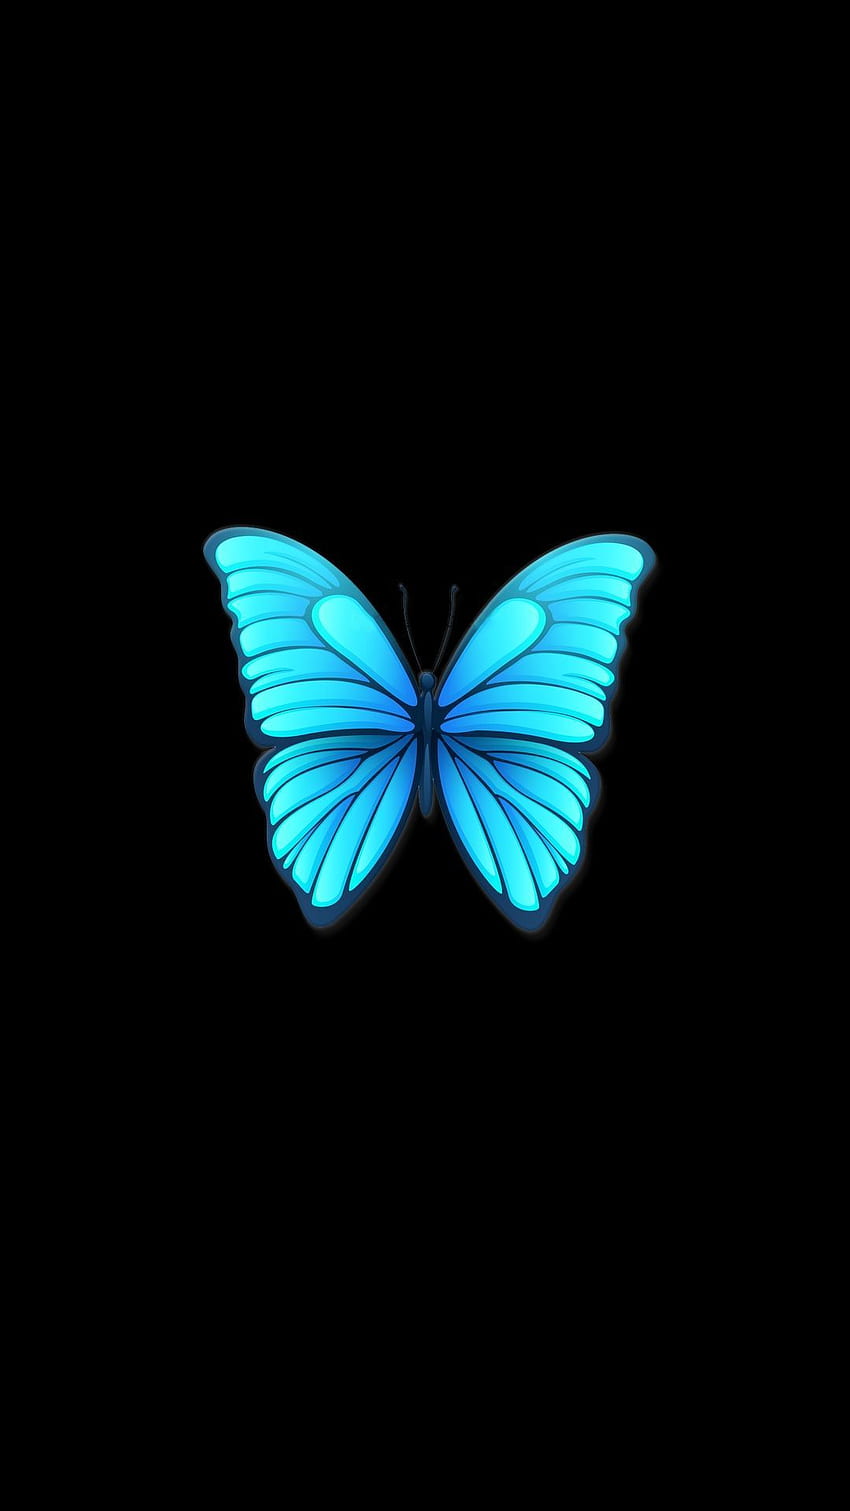 Amoled 14. Butterfly iphone, Butterfly , Teal and black 見てみる HD電話の壁紙